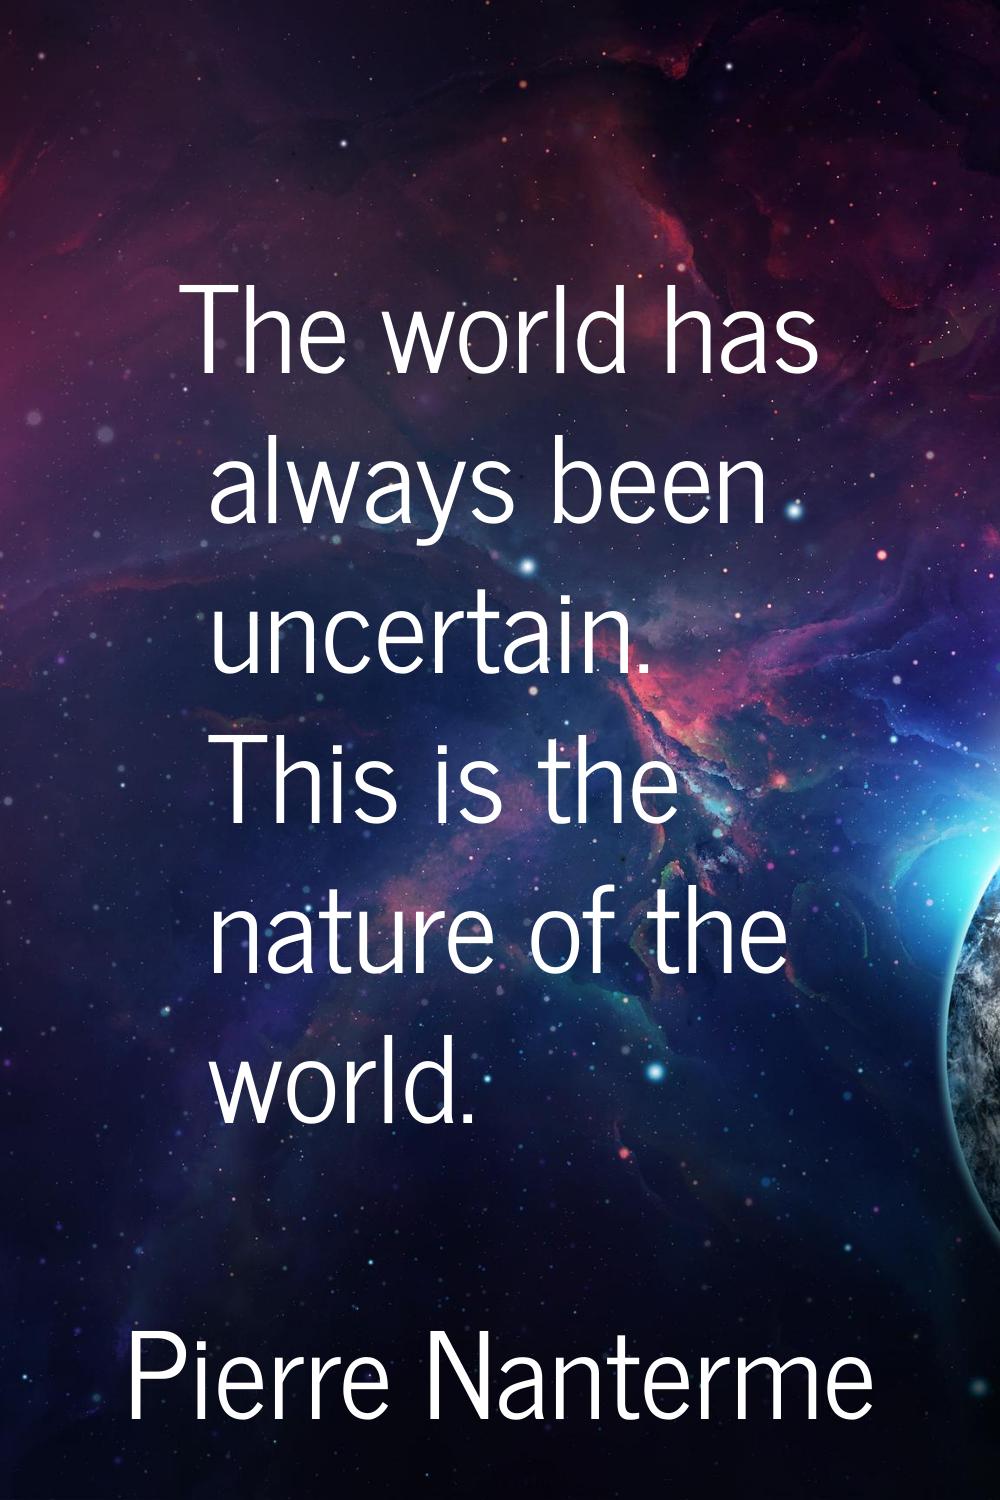 The world has always been uncertain. This is the nature of the world.